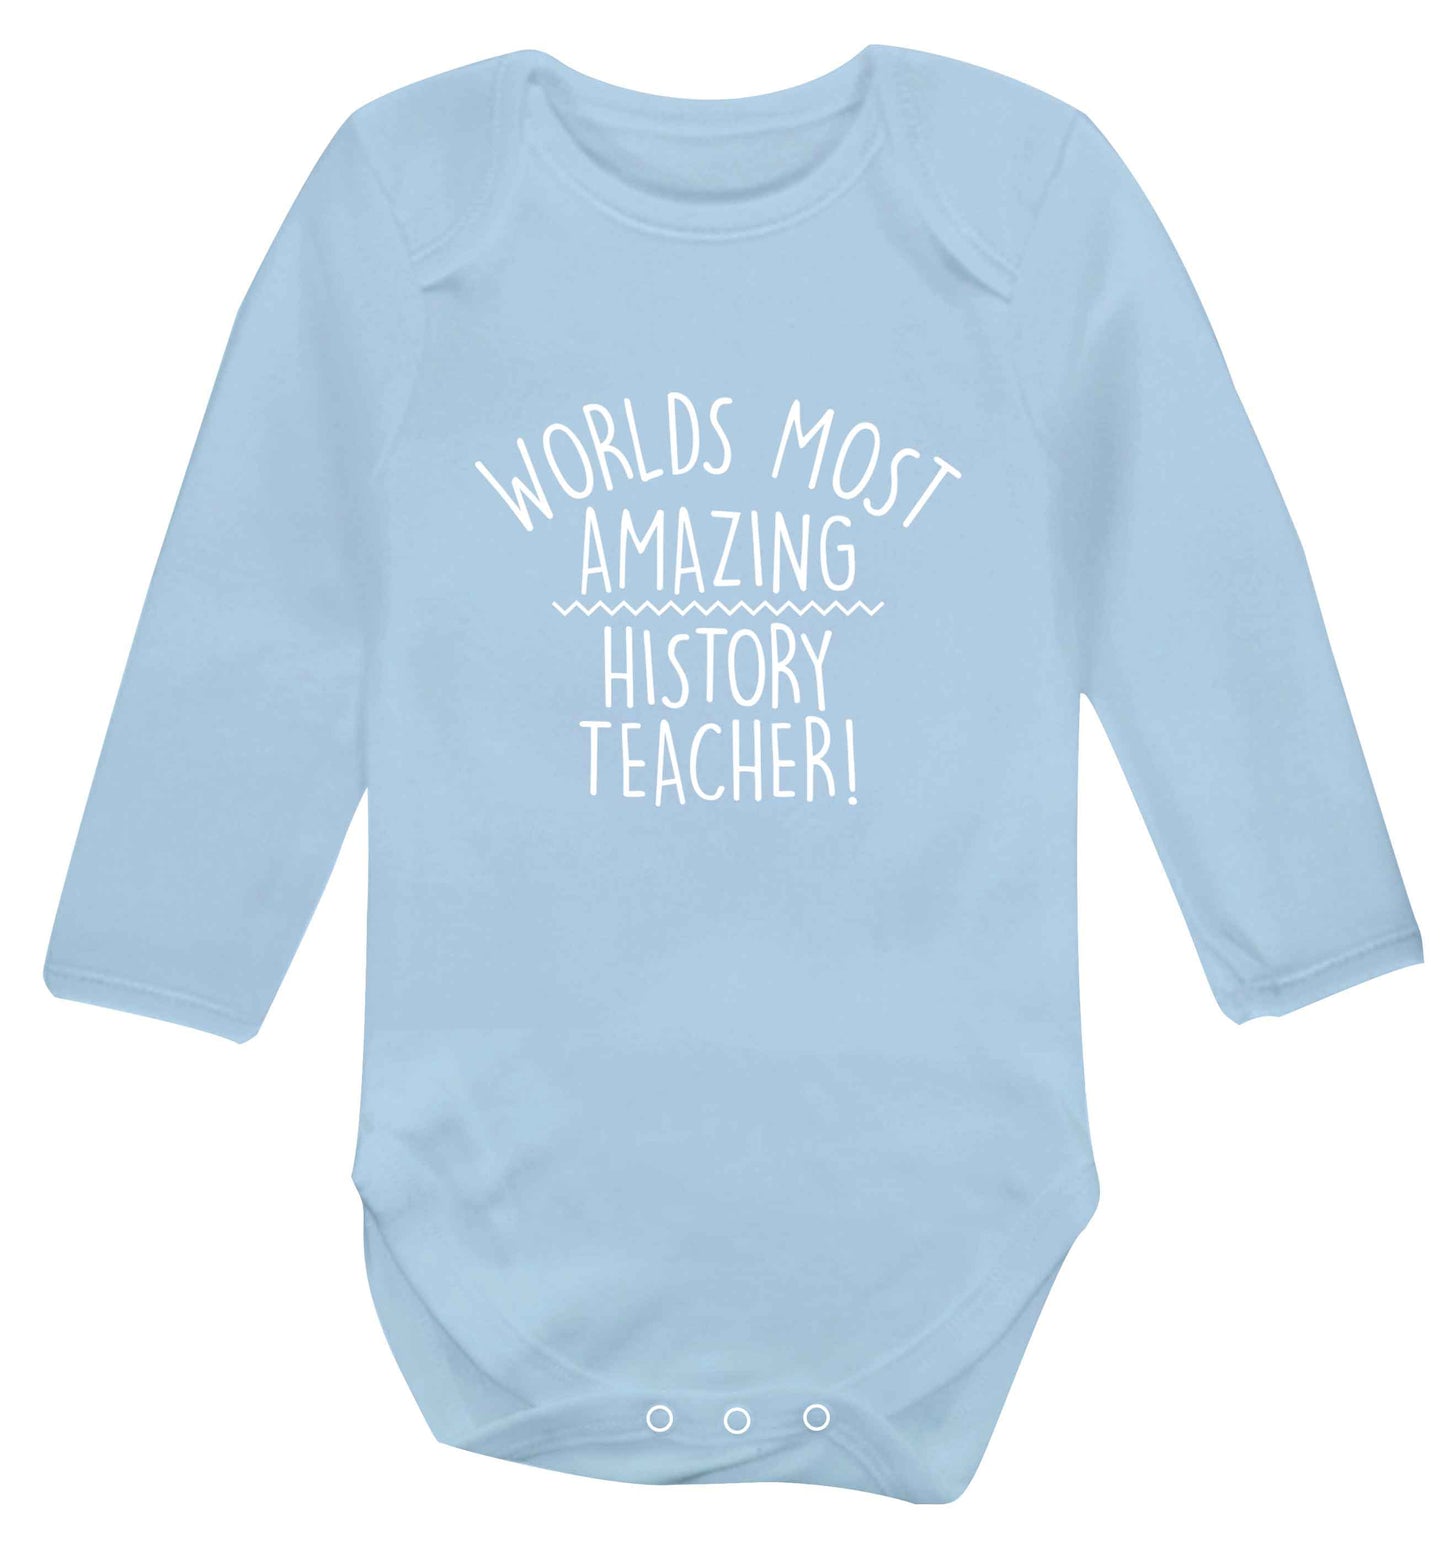 Worlds most amazing History teacher baby vest long sleeved pale blue 6-12 months